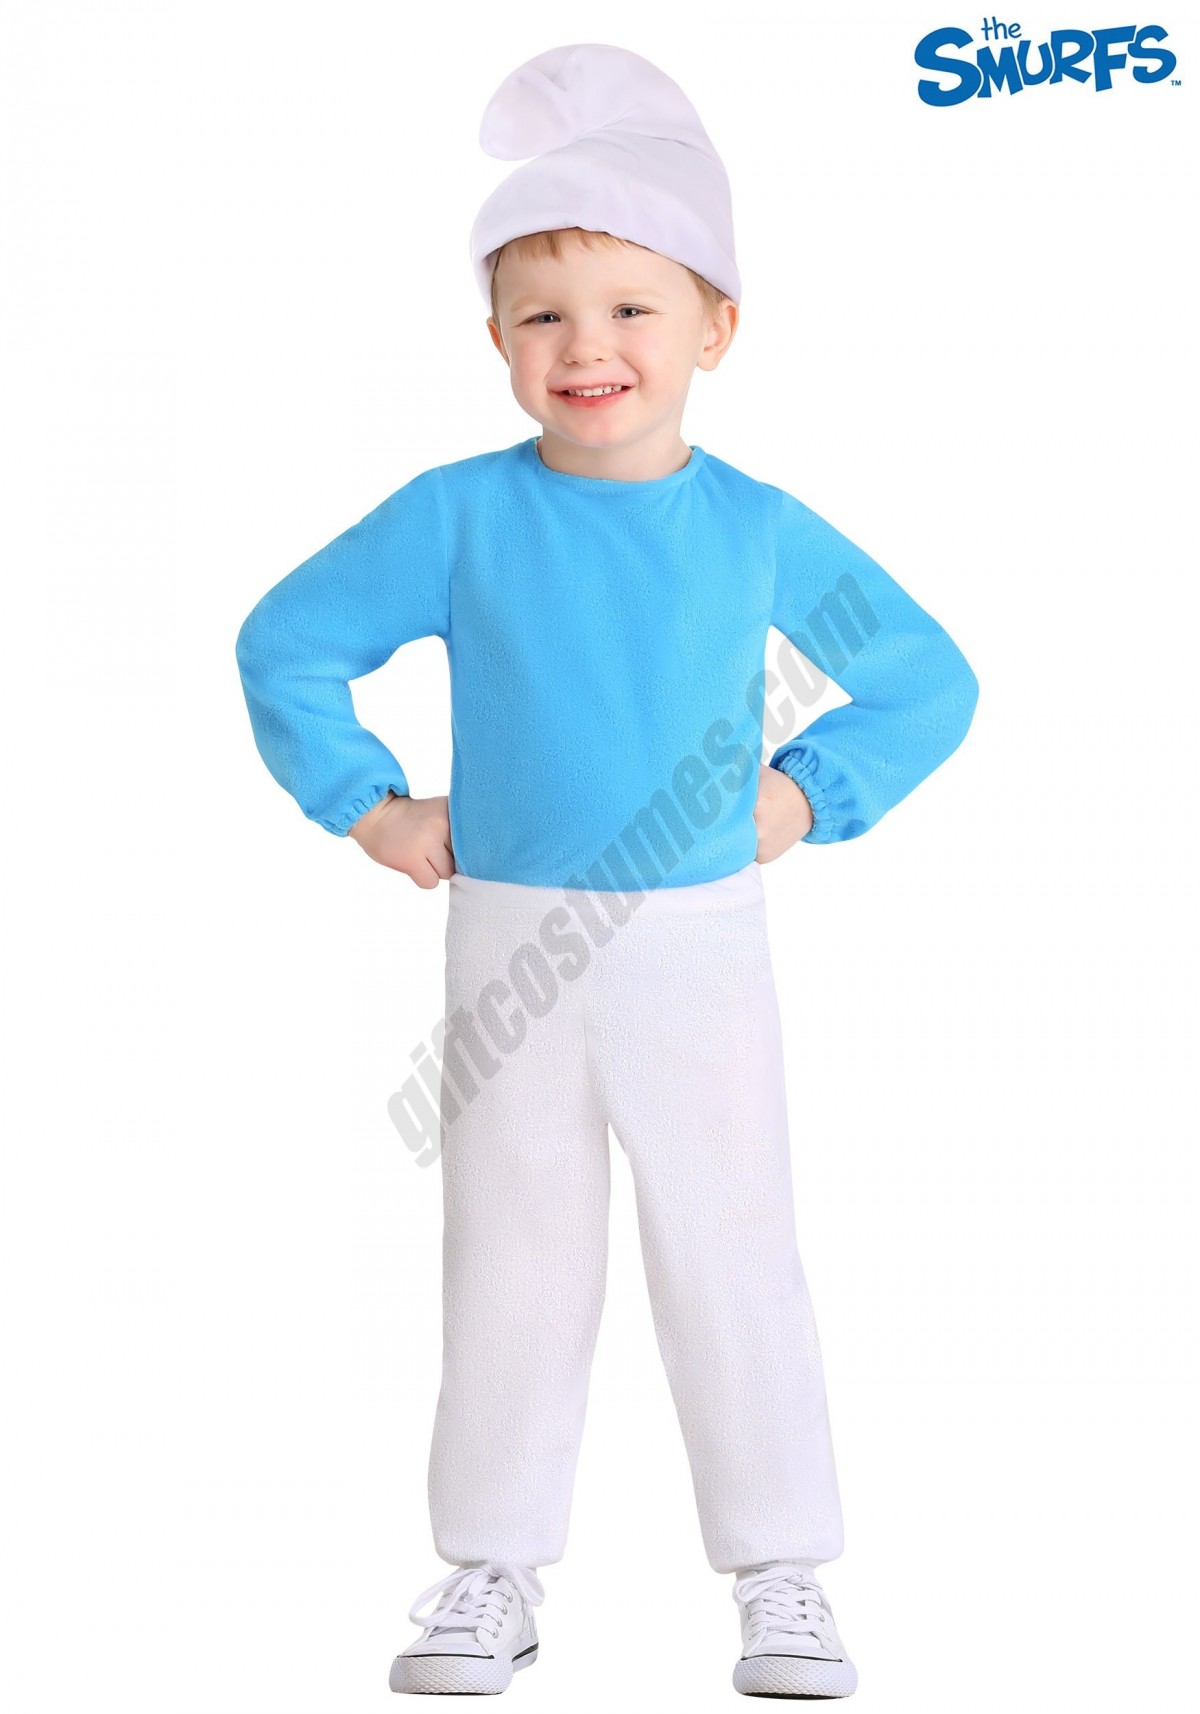 Toddler The Smurfs Smurf Costume Promotions - -0